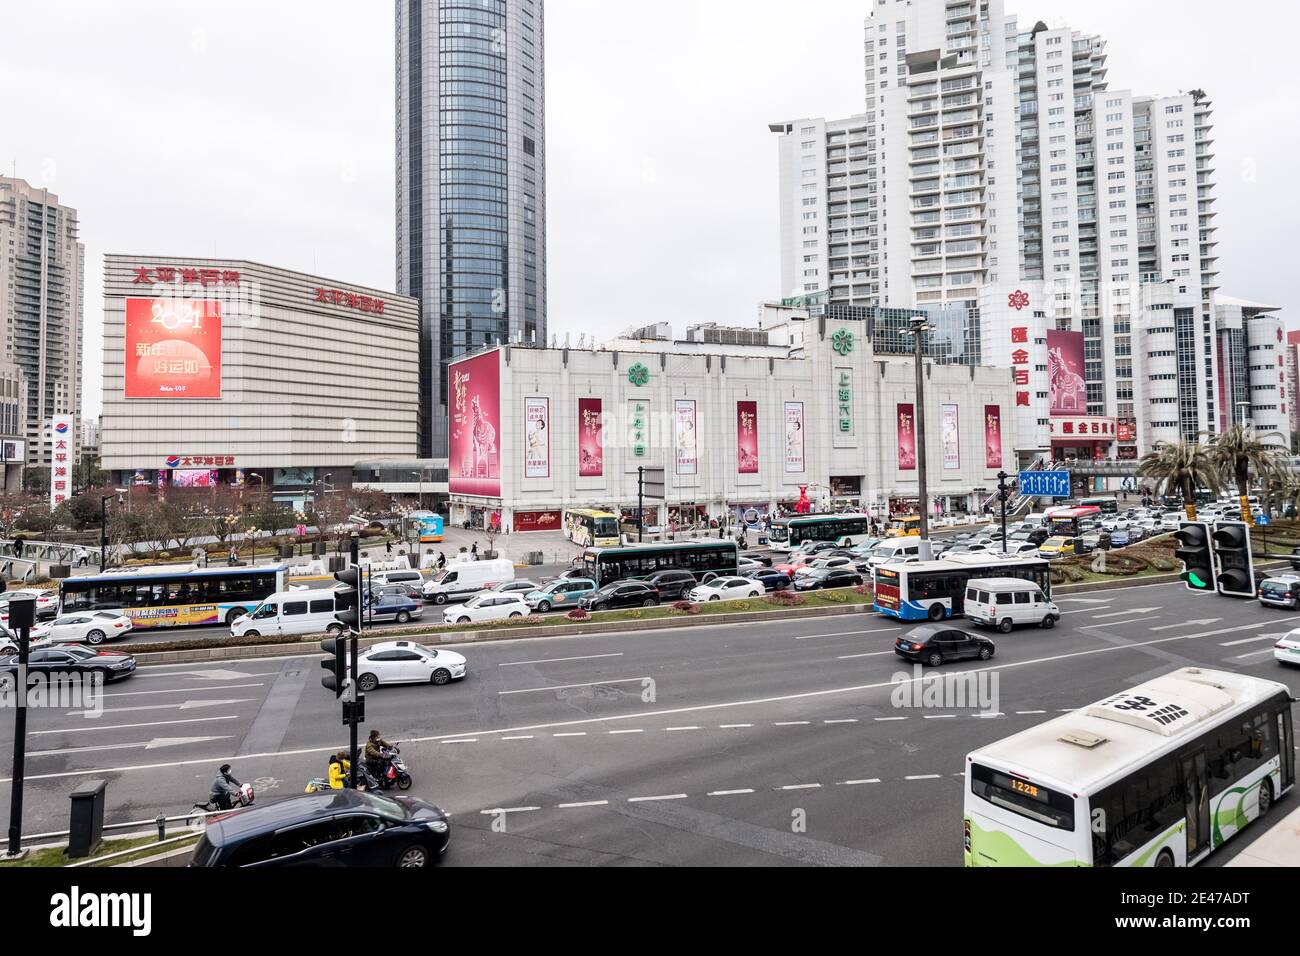 The exterior view of Shanghai Liubai, a local mall with a history of 70 years, which will be rebuilt with an investment of 700 million Yuan (100 milli Stock Photo